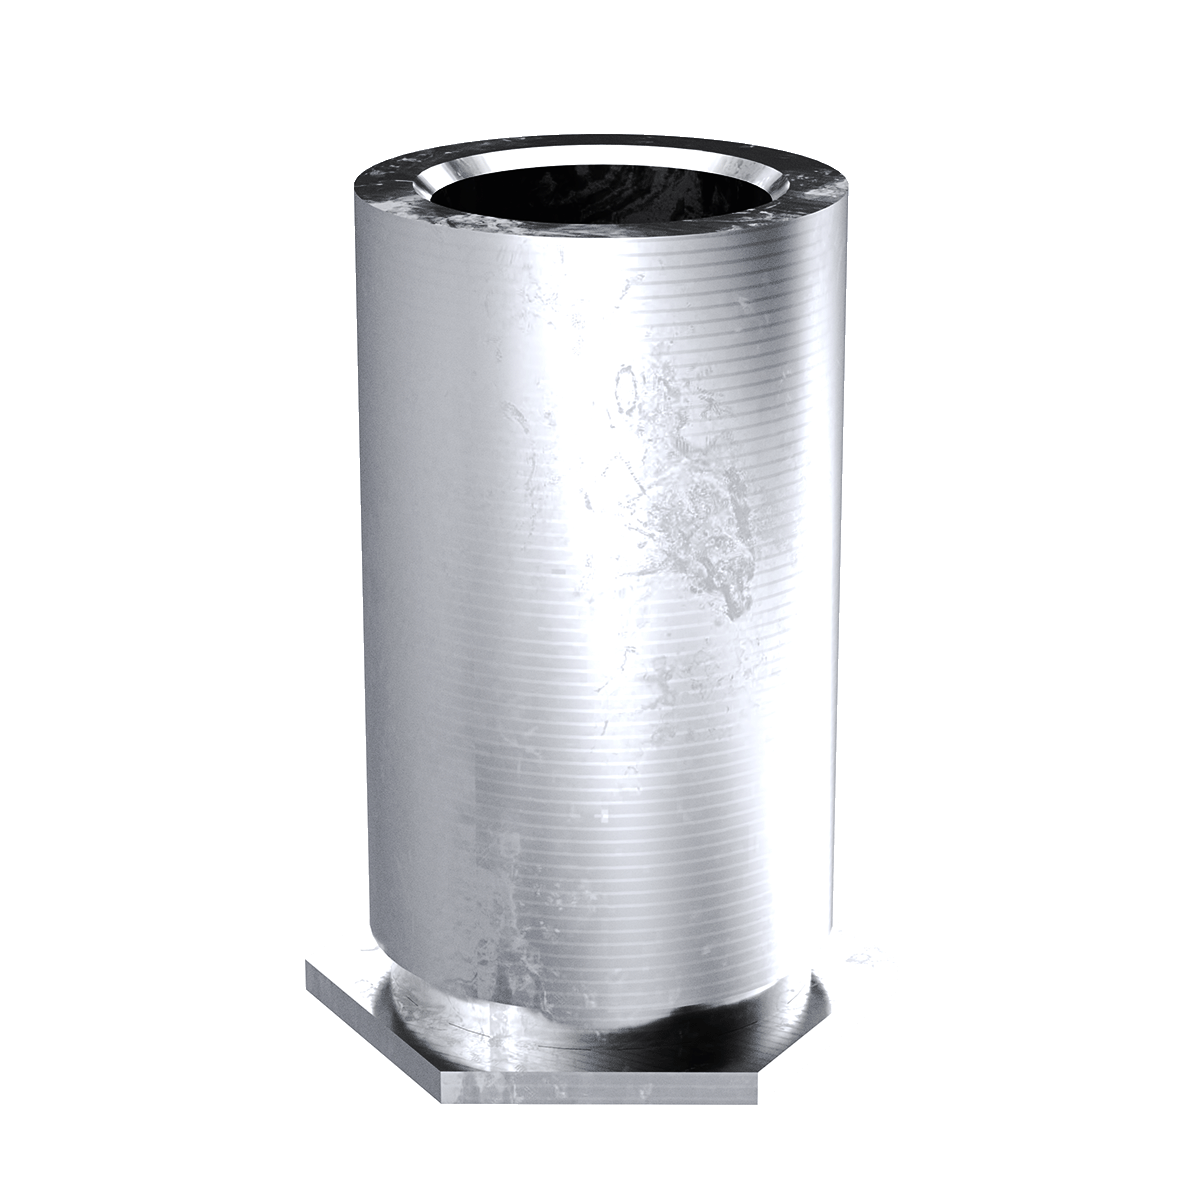 Self-Clinching Standoff, Through Unthreaded, 300 Series Stainless Steel, Passivated, 3.6 x 12, Hole Dia.: 7.1, 100 Pack